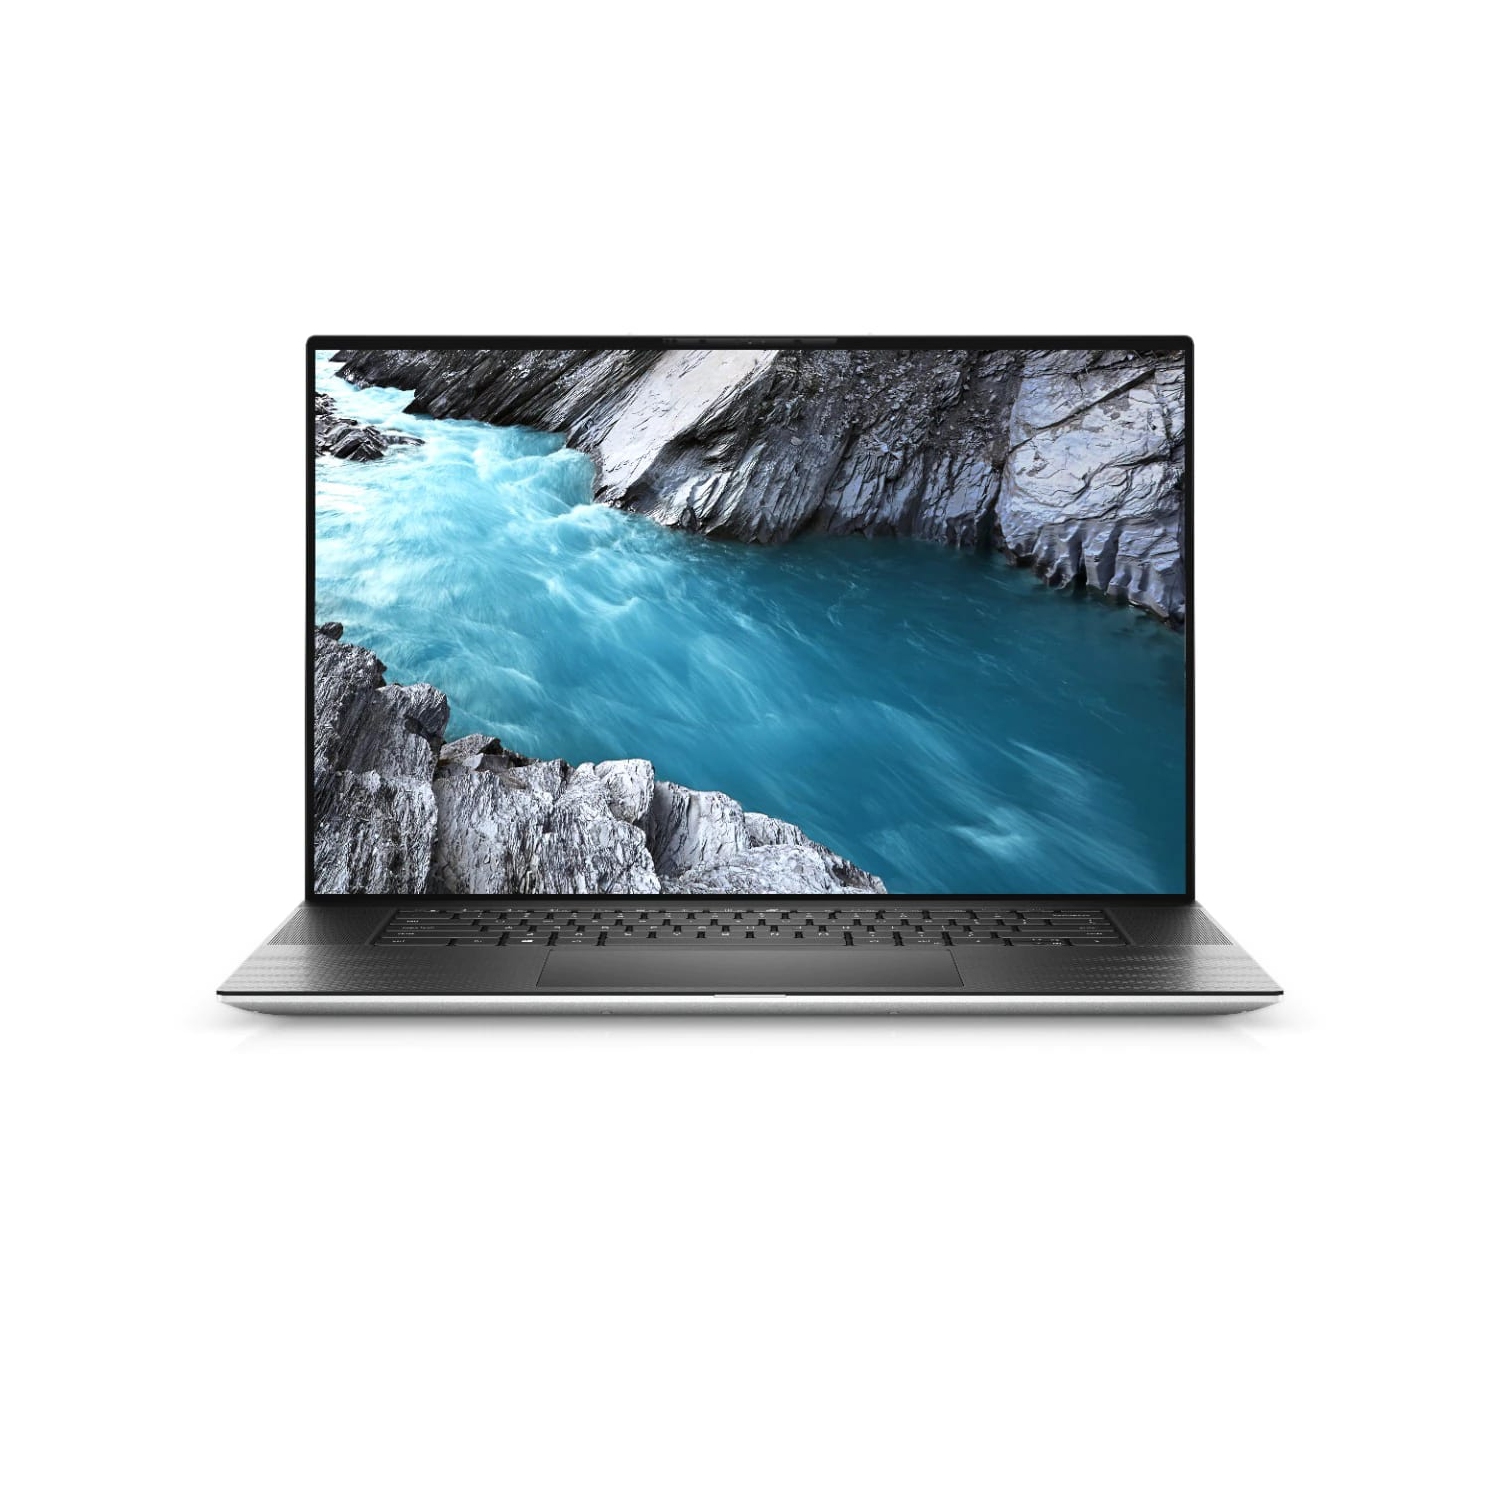 Refurbished (Excellent) - Dell XPS 17 9700 Laptop (2020), 17" 4K Touch, Core i7 - 512GB SSD - 64GB RAM - RTX 2060, 8 Cores @ 5.1 GHz - 10th Gen CPU Certified Refurbished